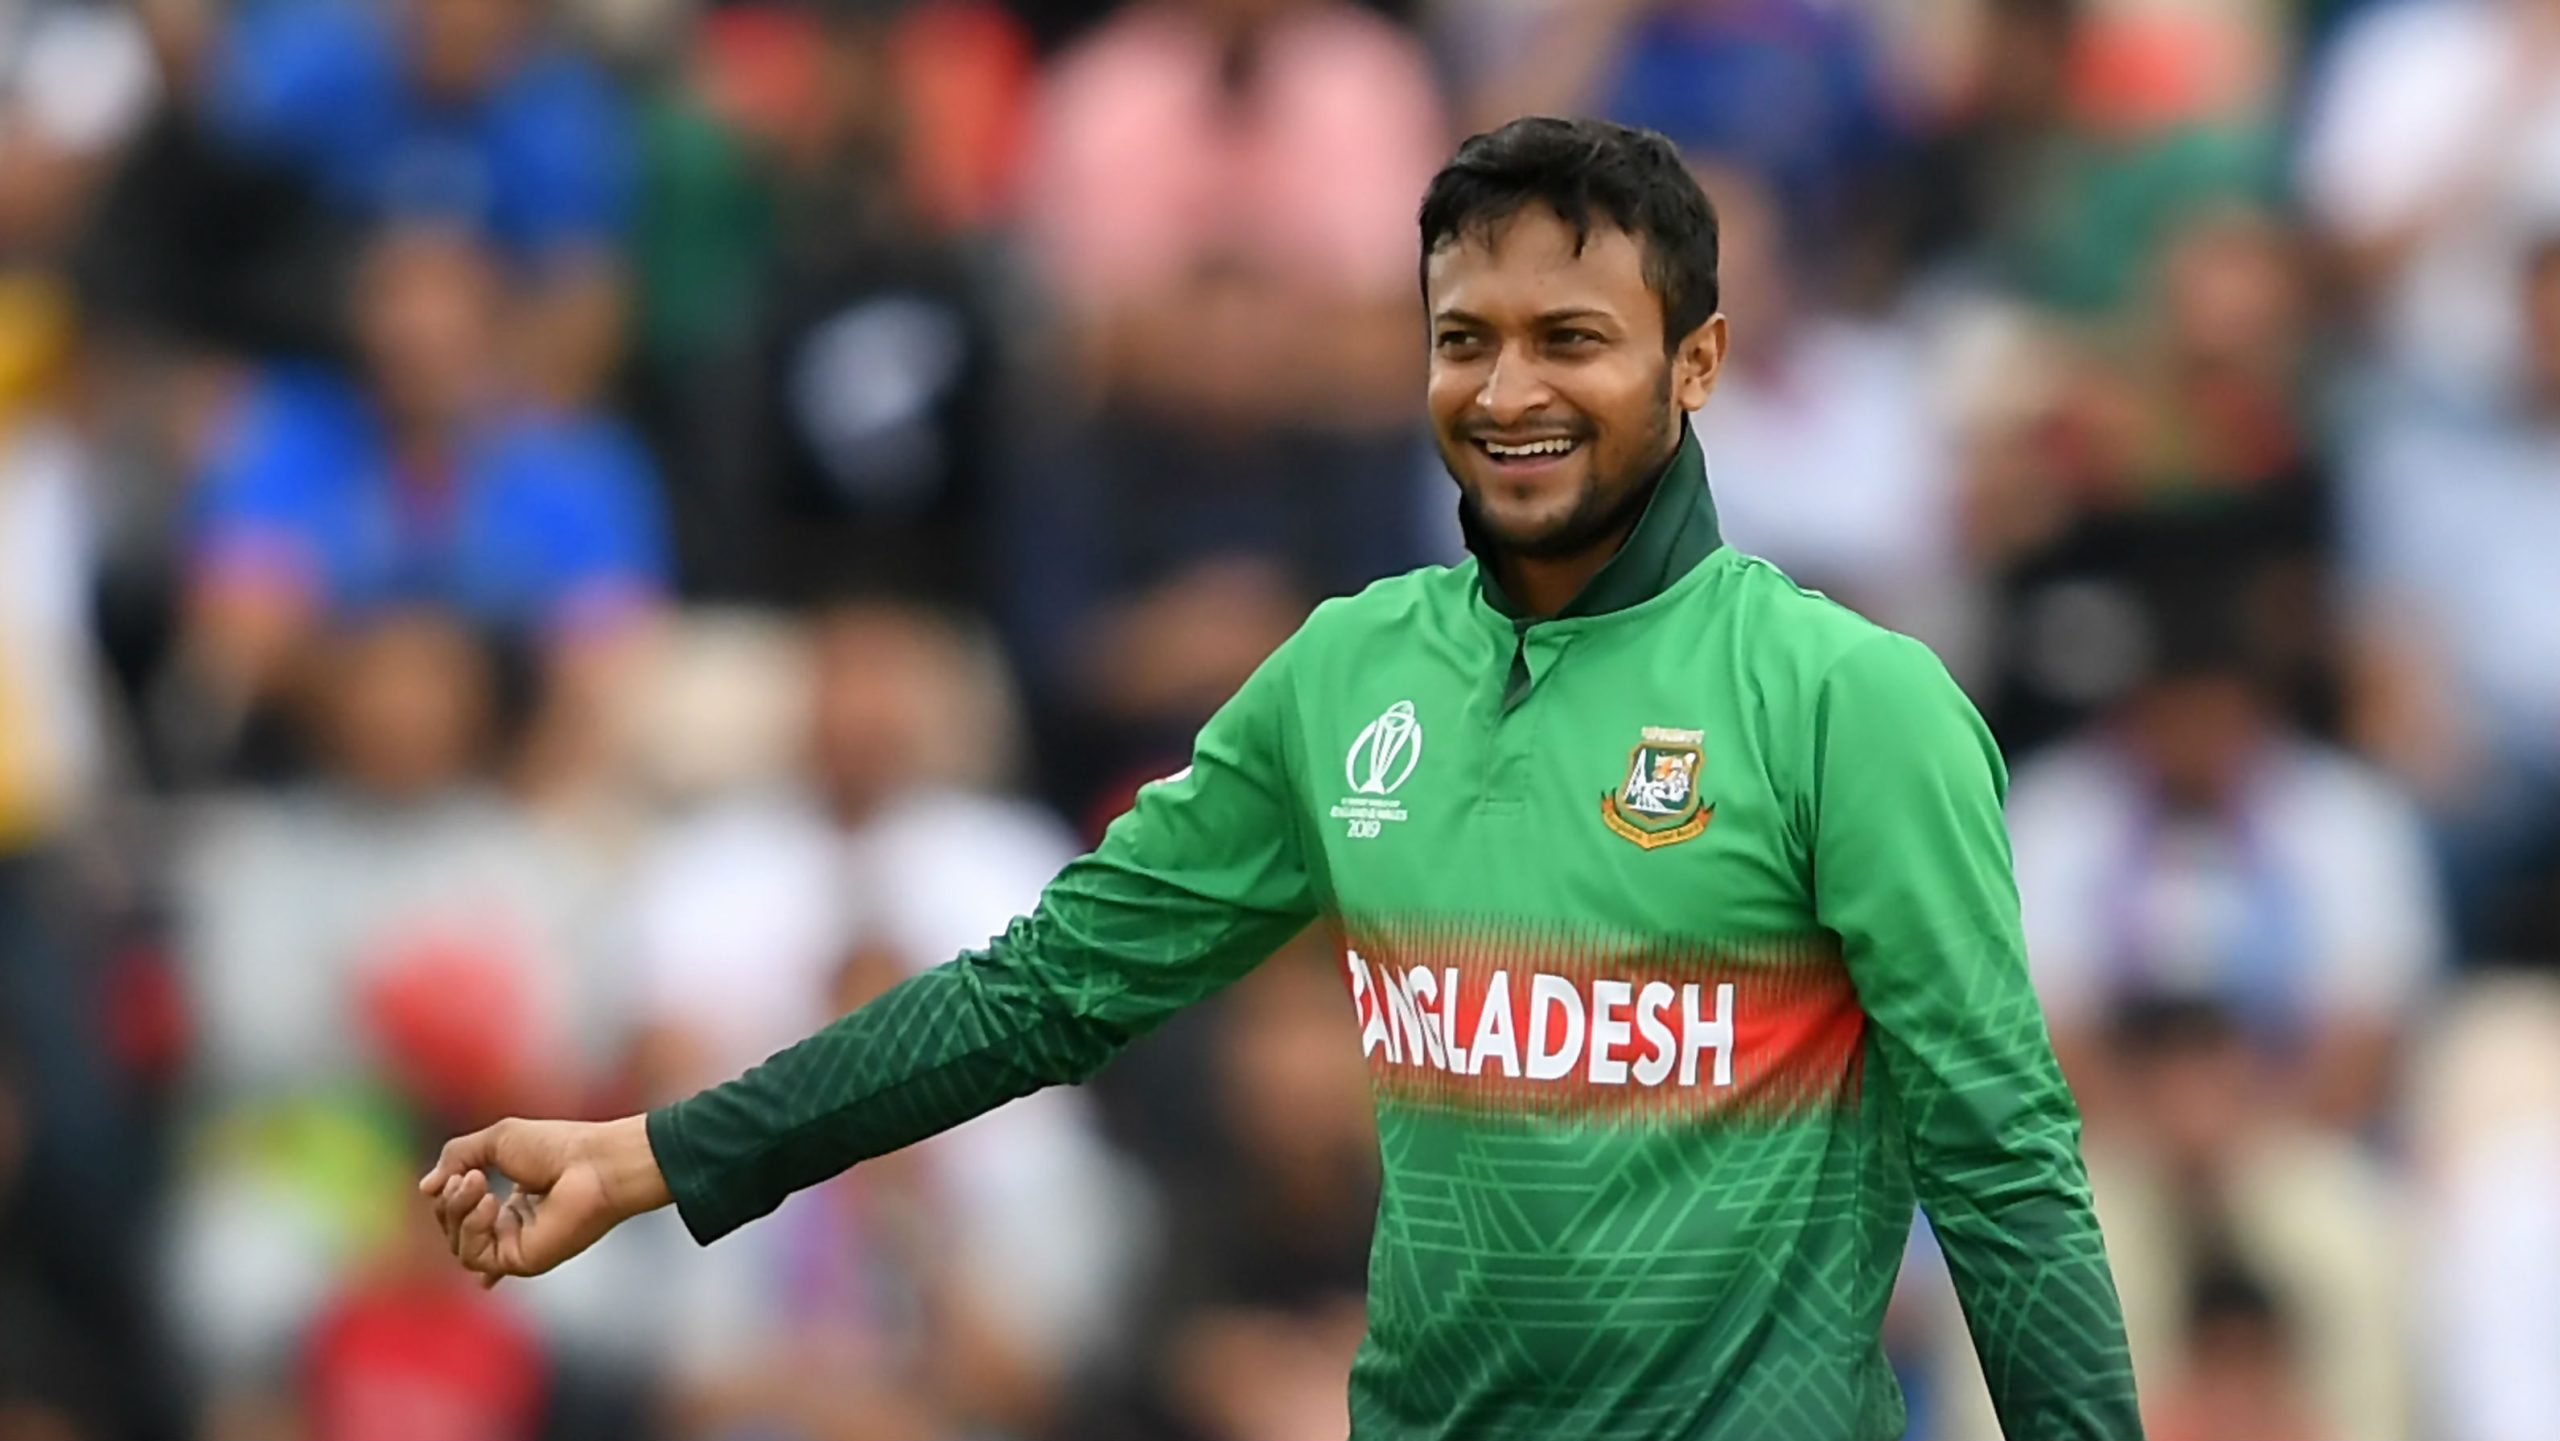 ICC Cricket World Cup 2023: Shakib Al Hasan Returns To Dhaka For Short Training Session With Personal Mentor